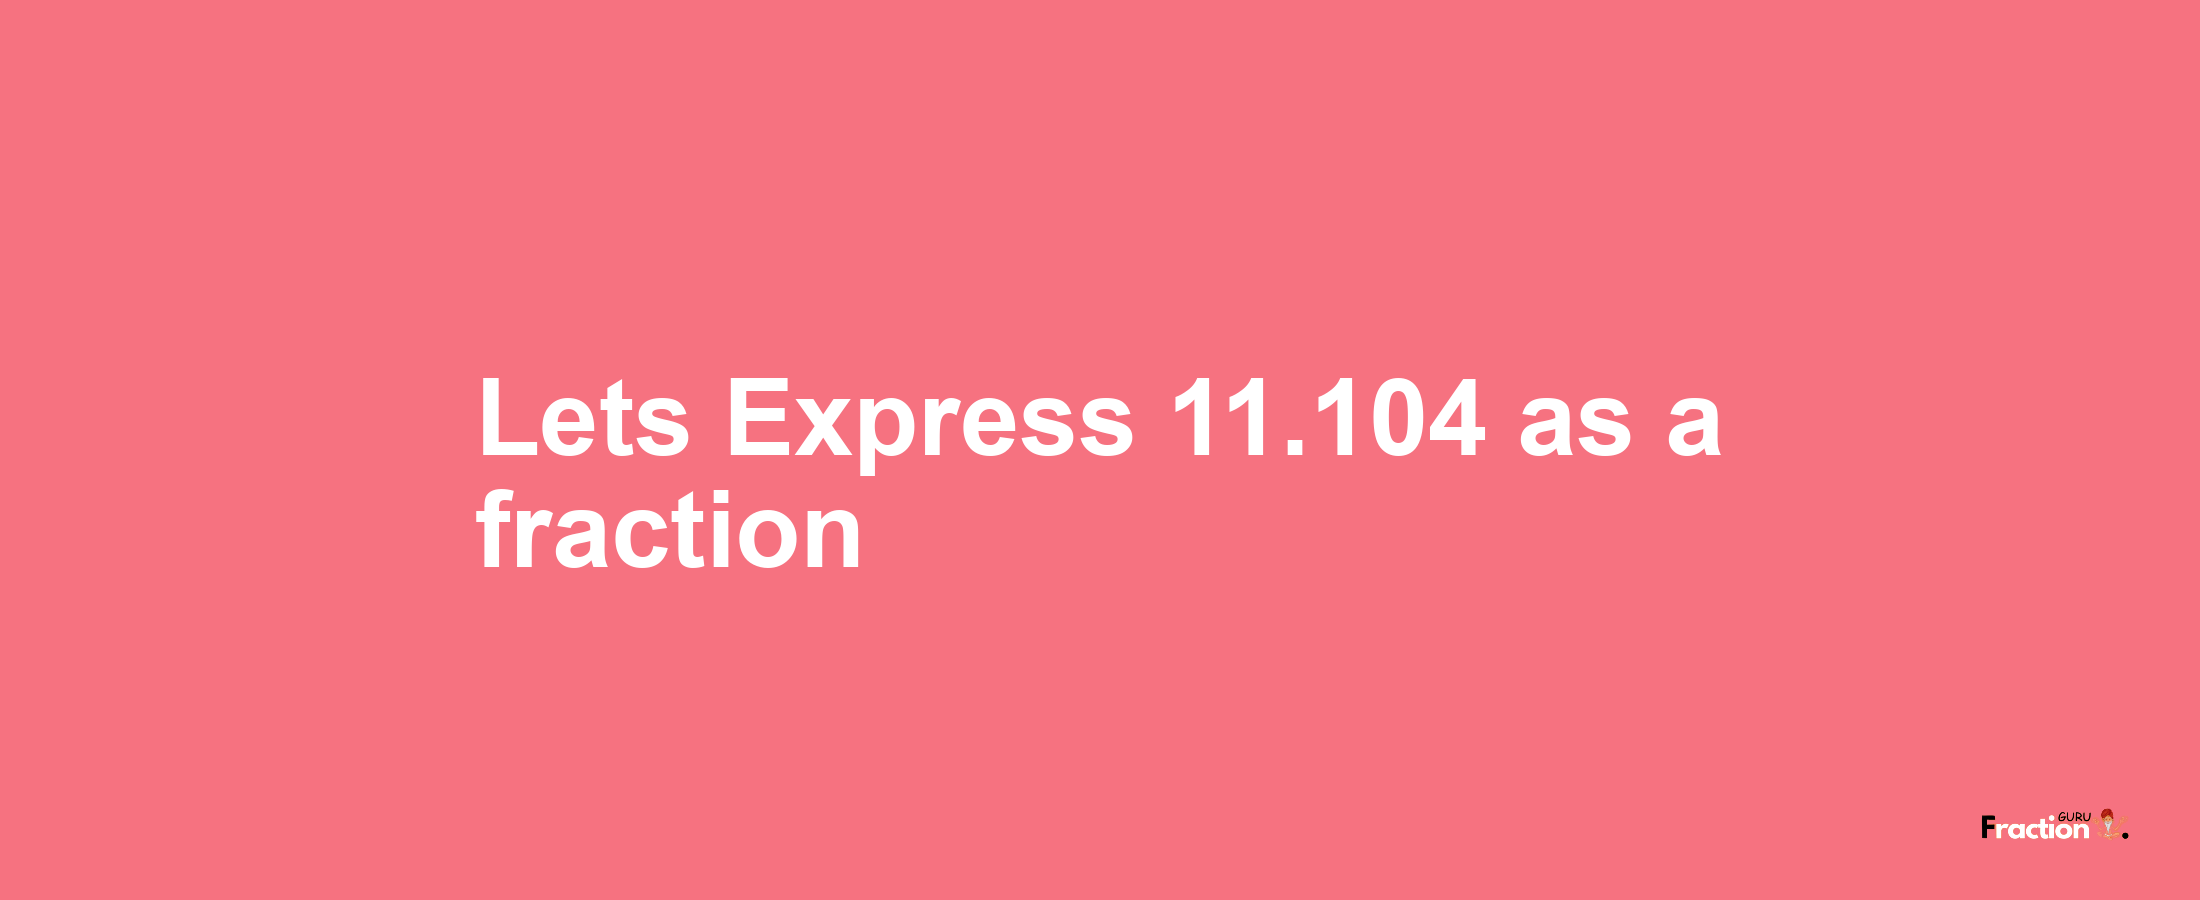 Lets Express 11.104 as afraction